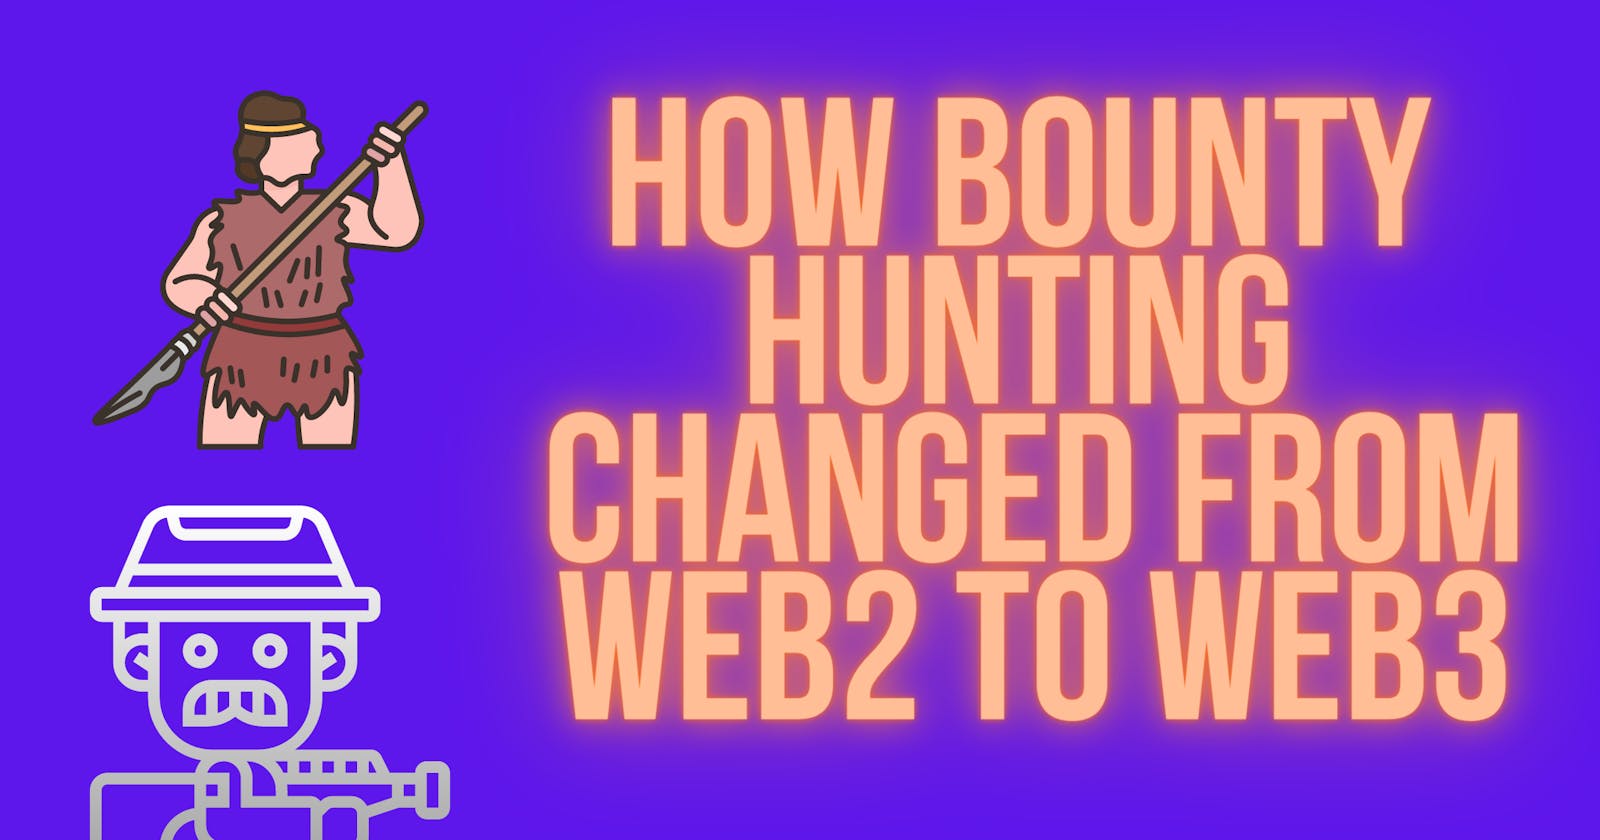 How Bounty Hunting changed from web2 to Web3 | Tekraze.com